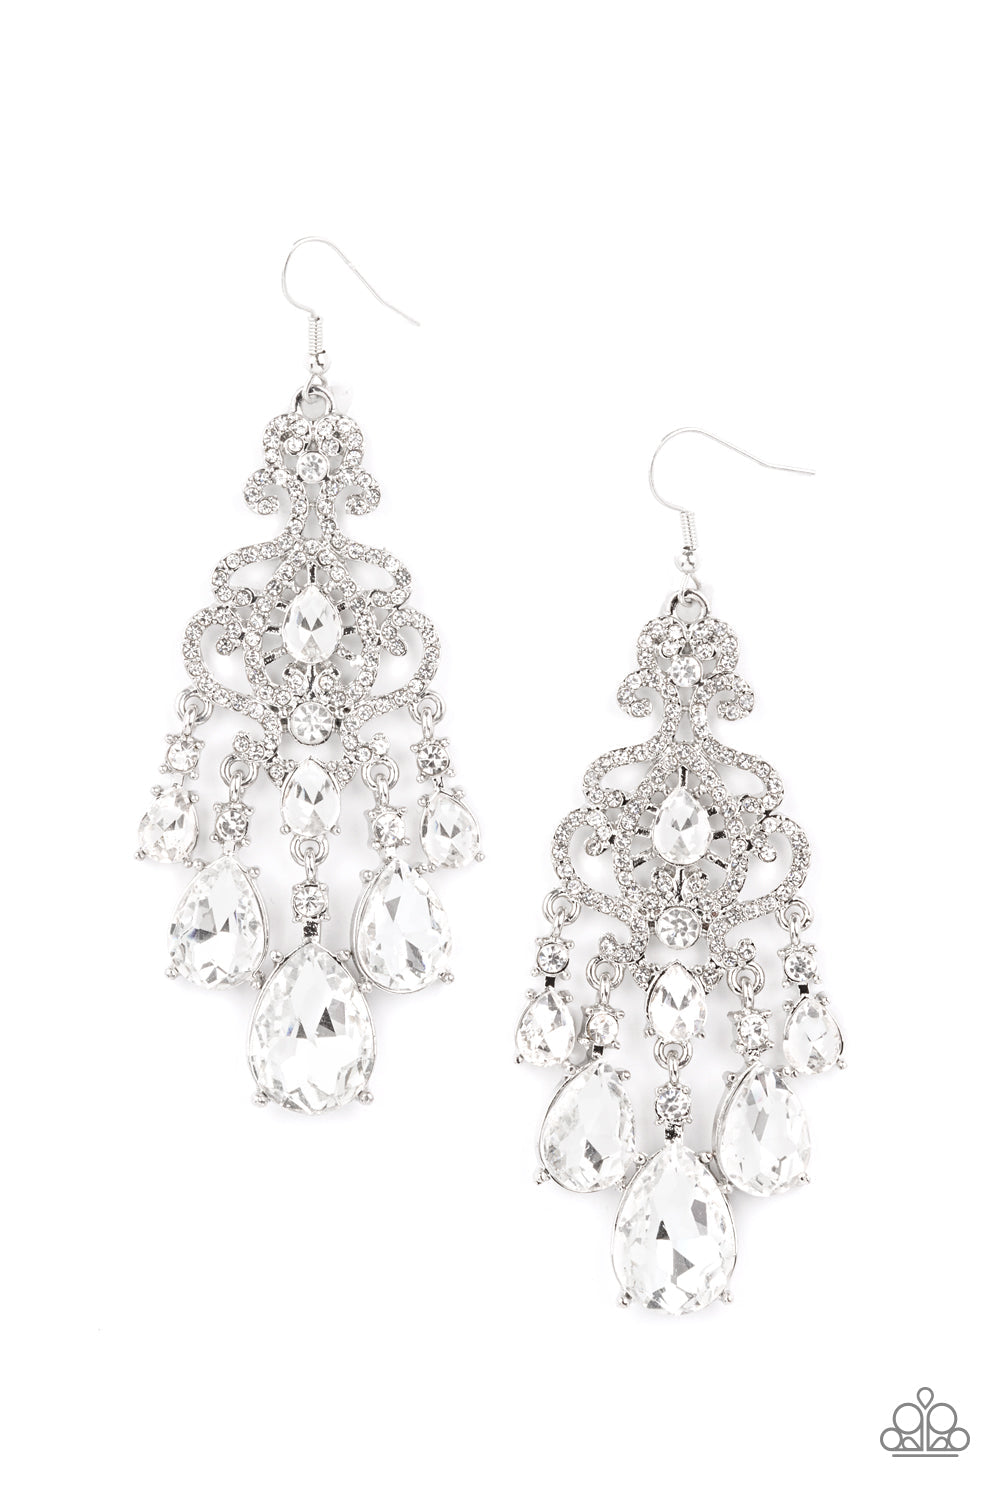 Queen Of All Things Sparkly - White and Silver Earrings - Paparazzi Jewelry - Bejeweled Accessories By Kristie - Gradually increasing in size, glassy white teardrop gems create a dramatic fringe at the bottom of a decorative silver frame swirling with dainty white rhinestones for a timelessly over-the-top sparkle.